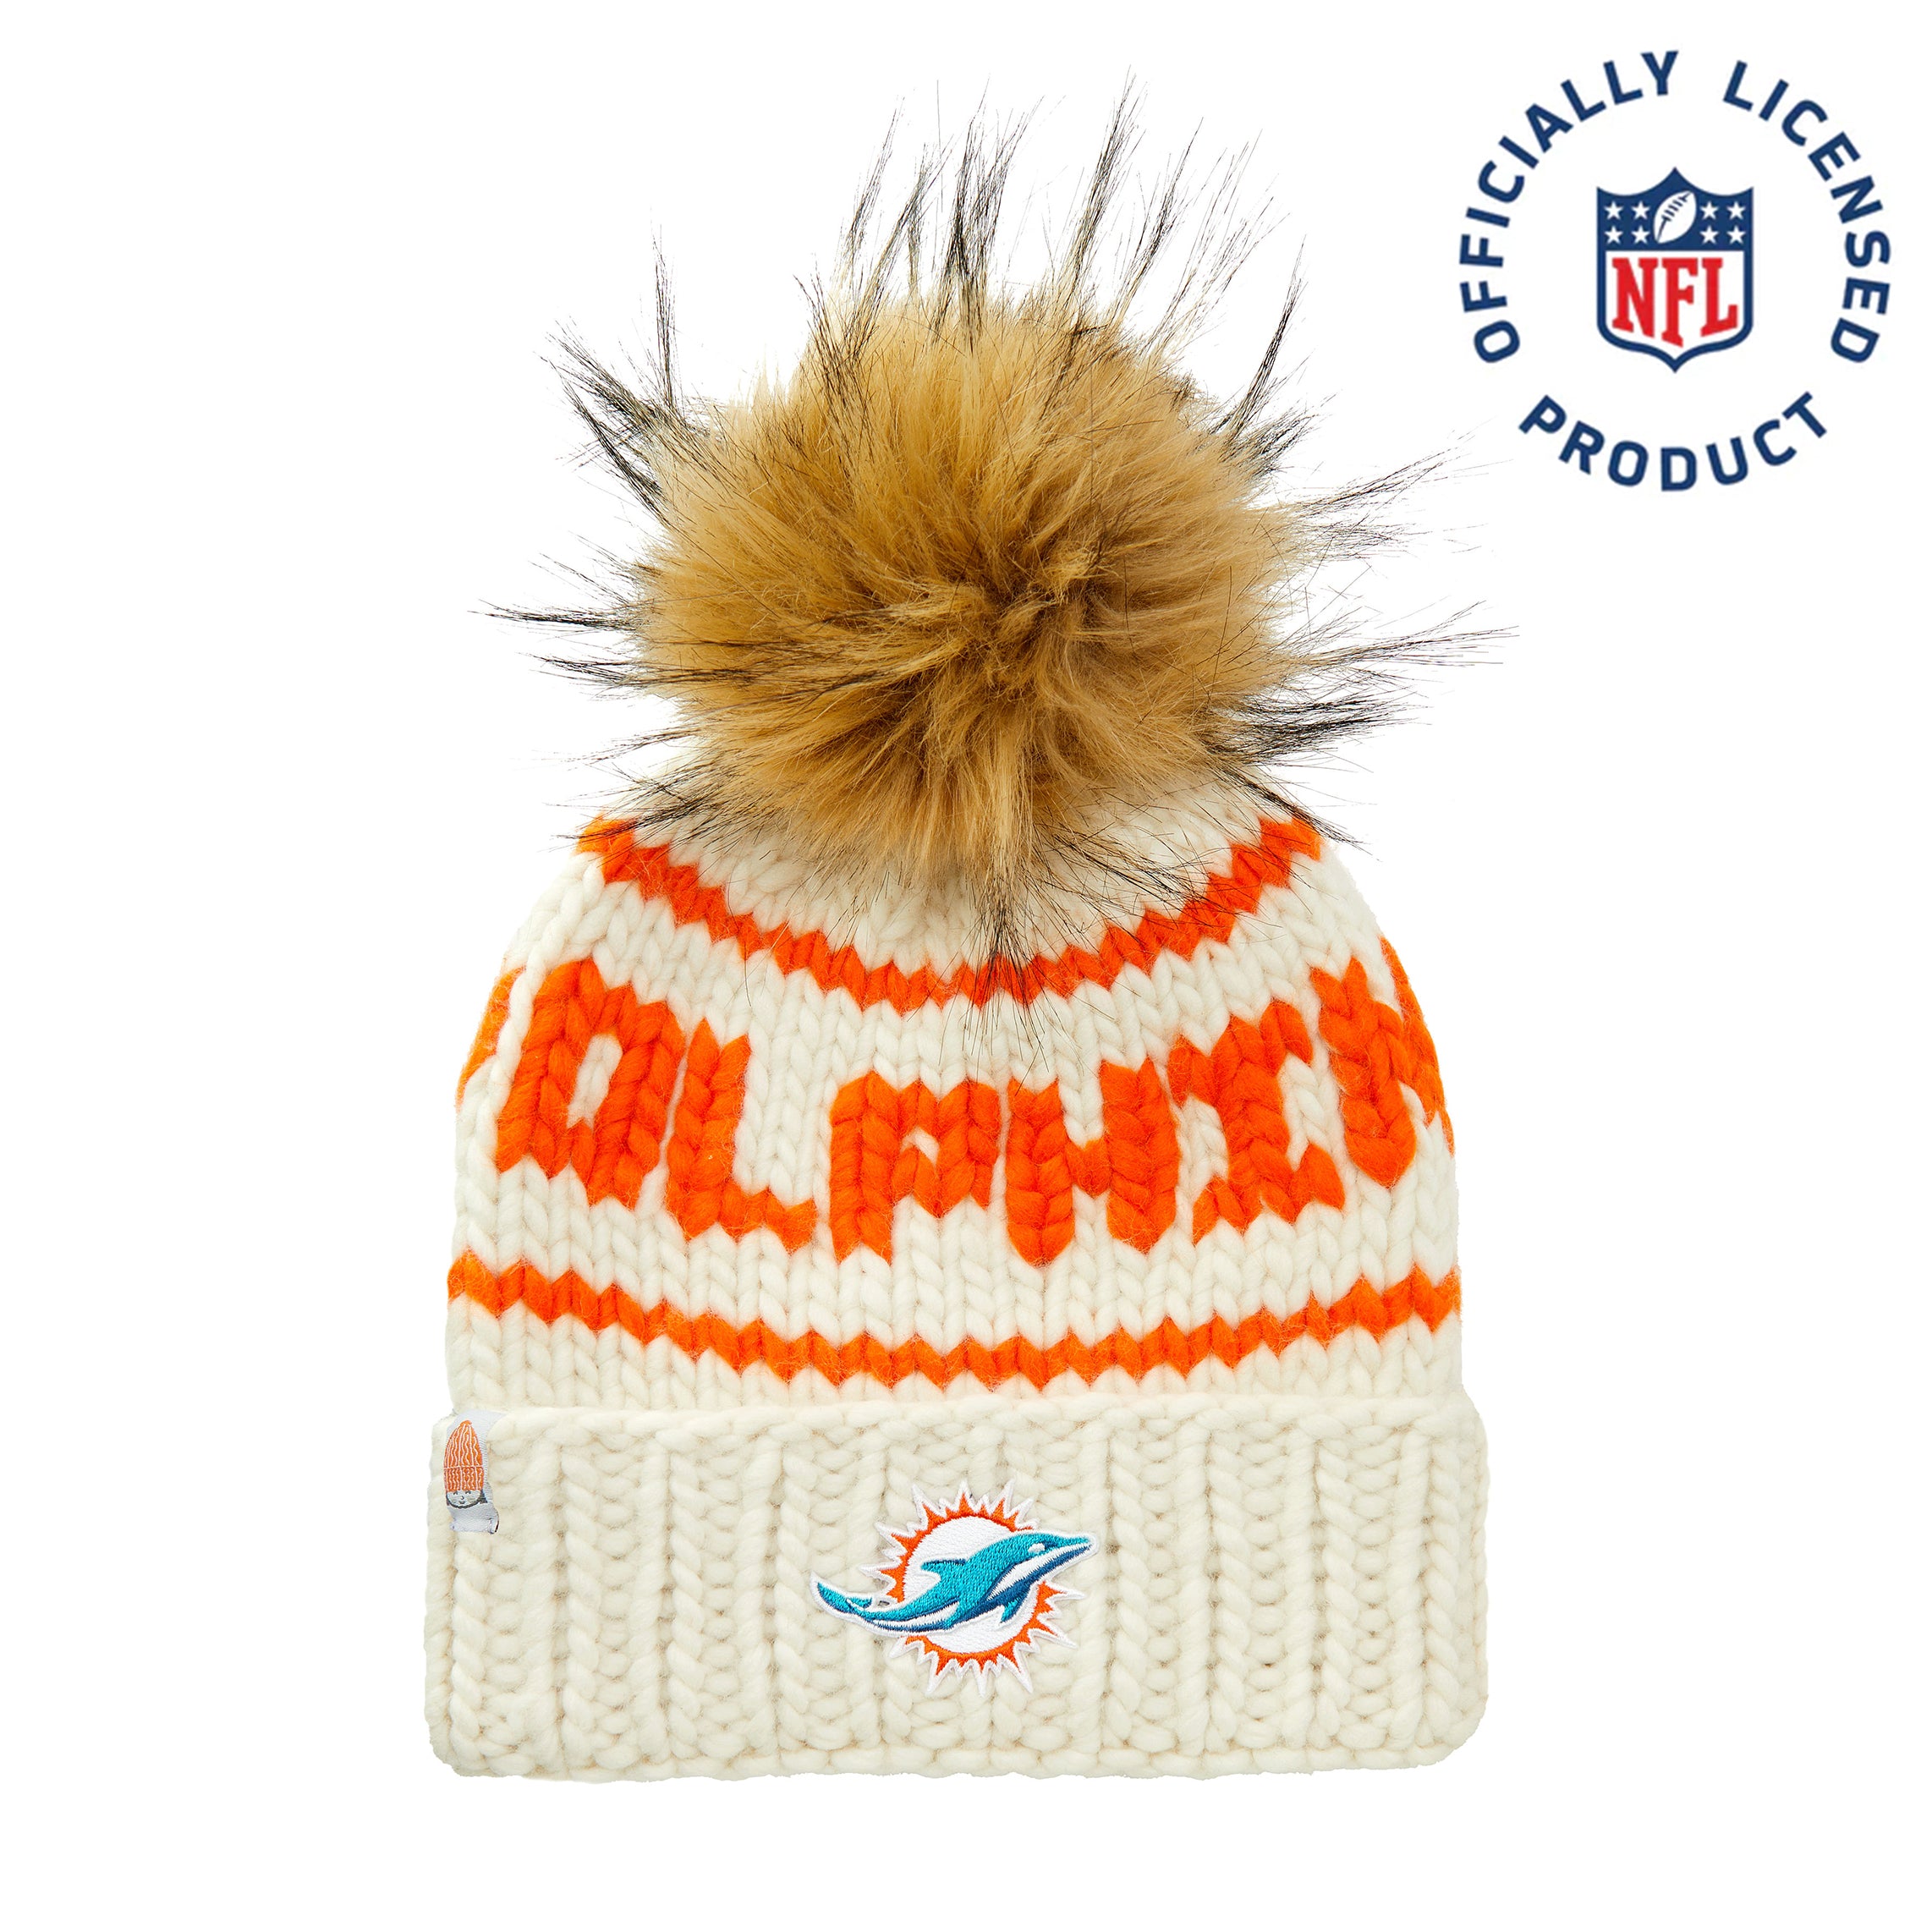 The Dolphins NFL Beanie with Faux Fur Pom